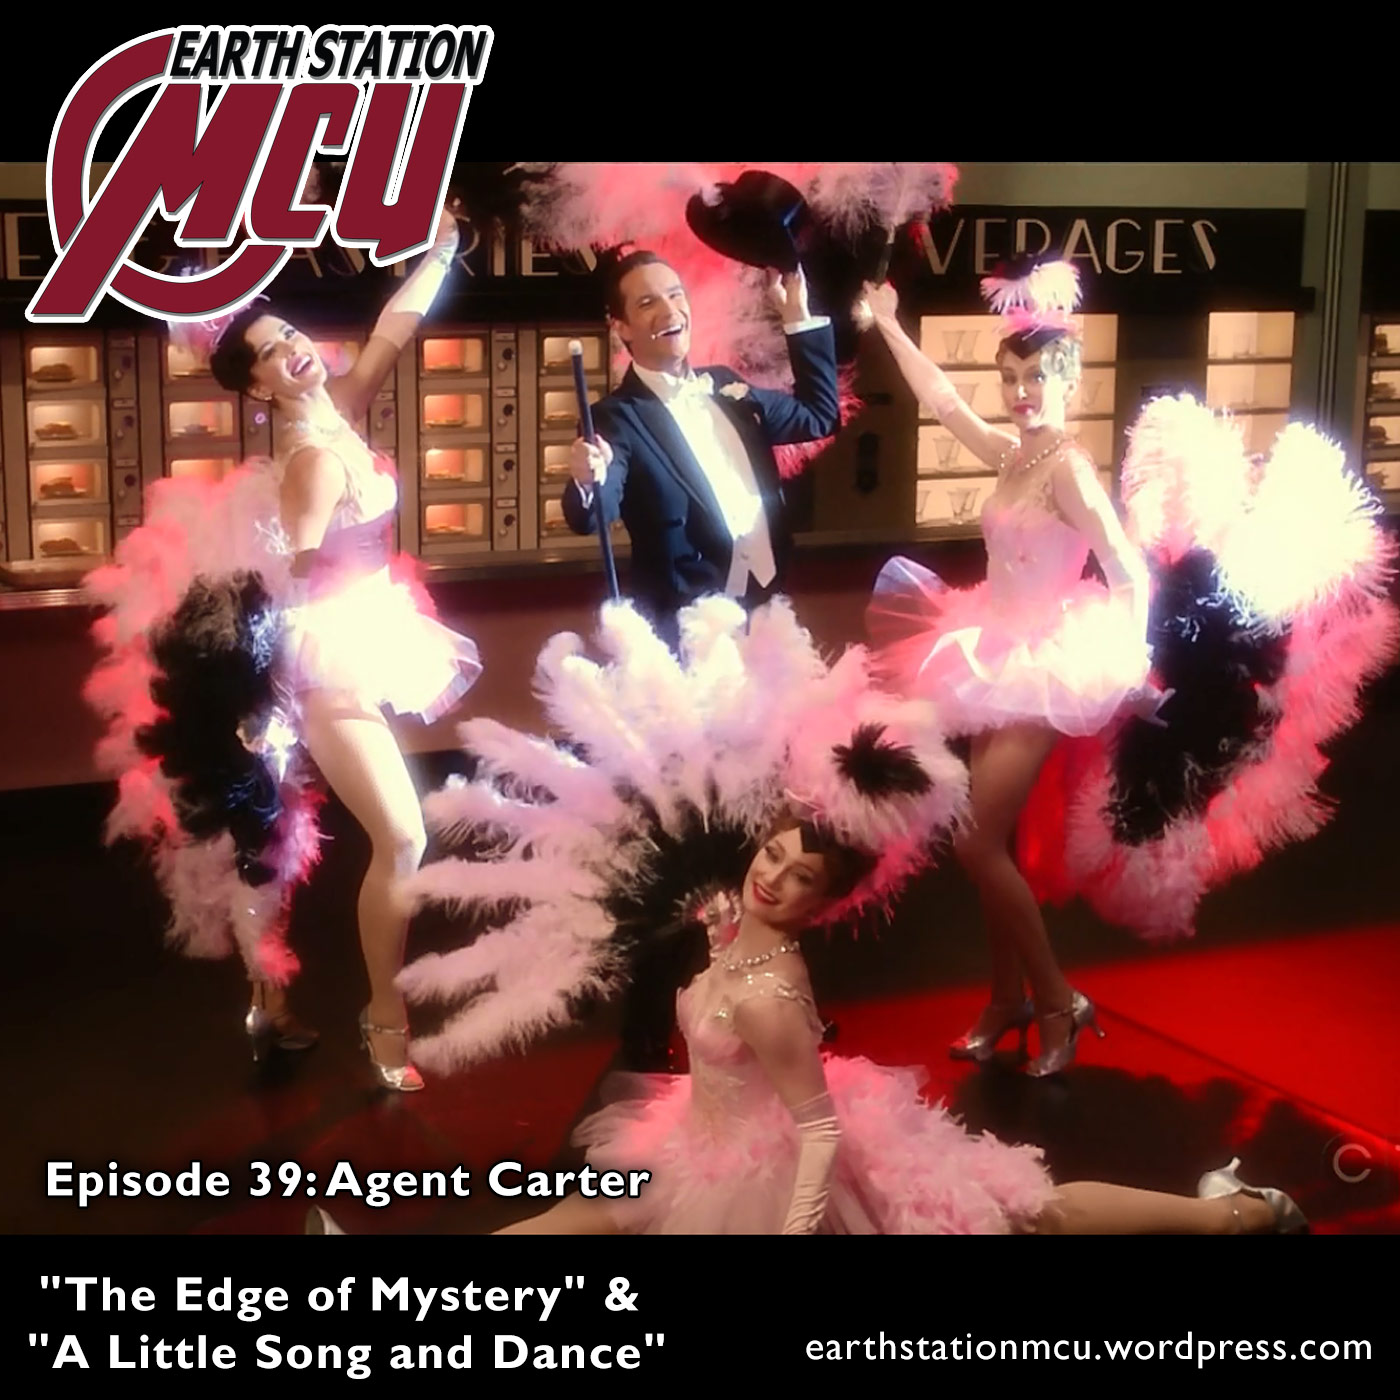 Earth Station MCU: Episode 39  - Agent Carter, ”The Edge of Mystery” and ”A Little Song and Dance”